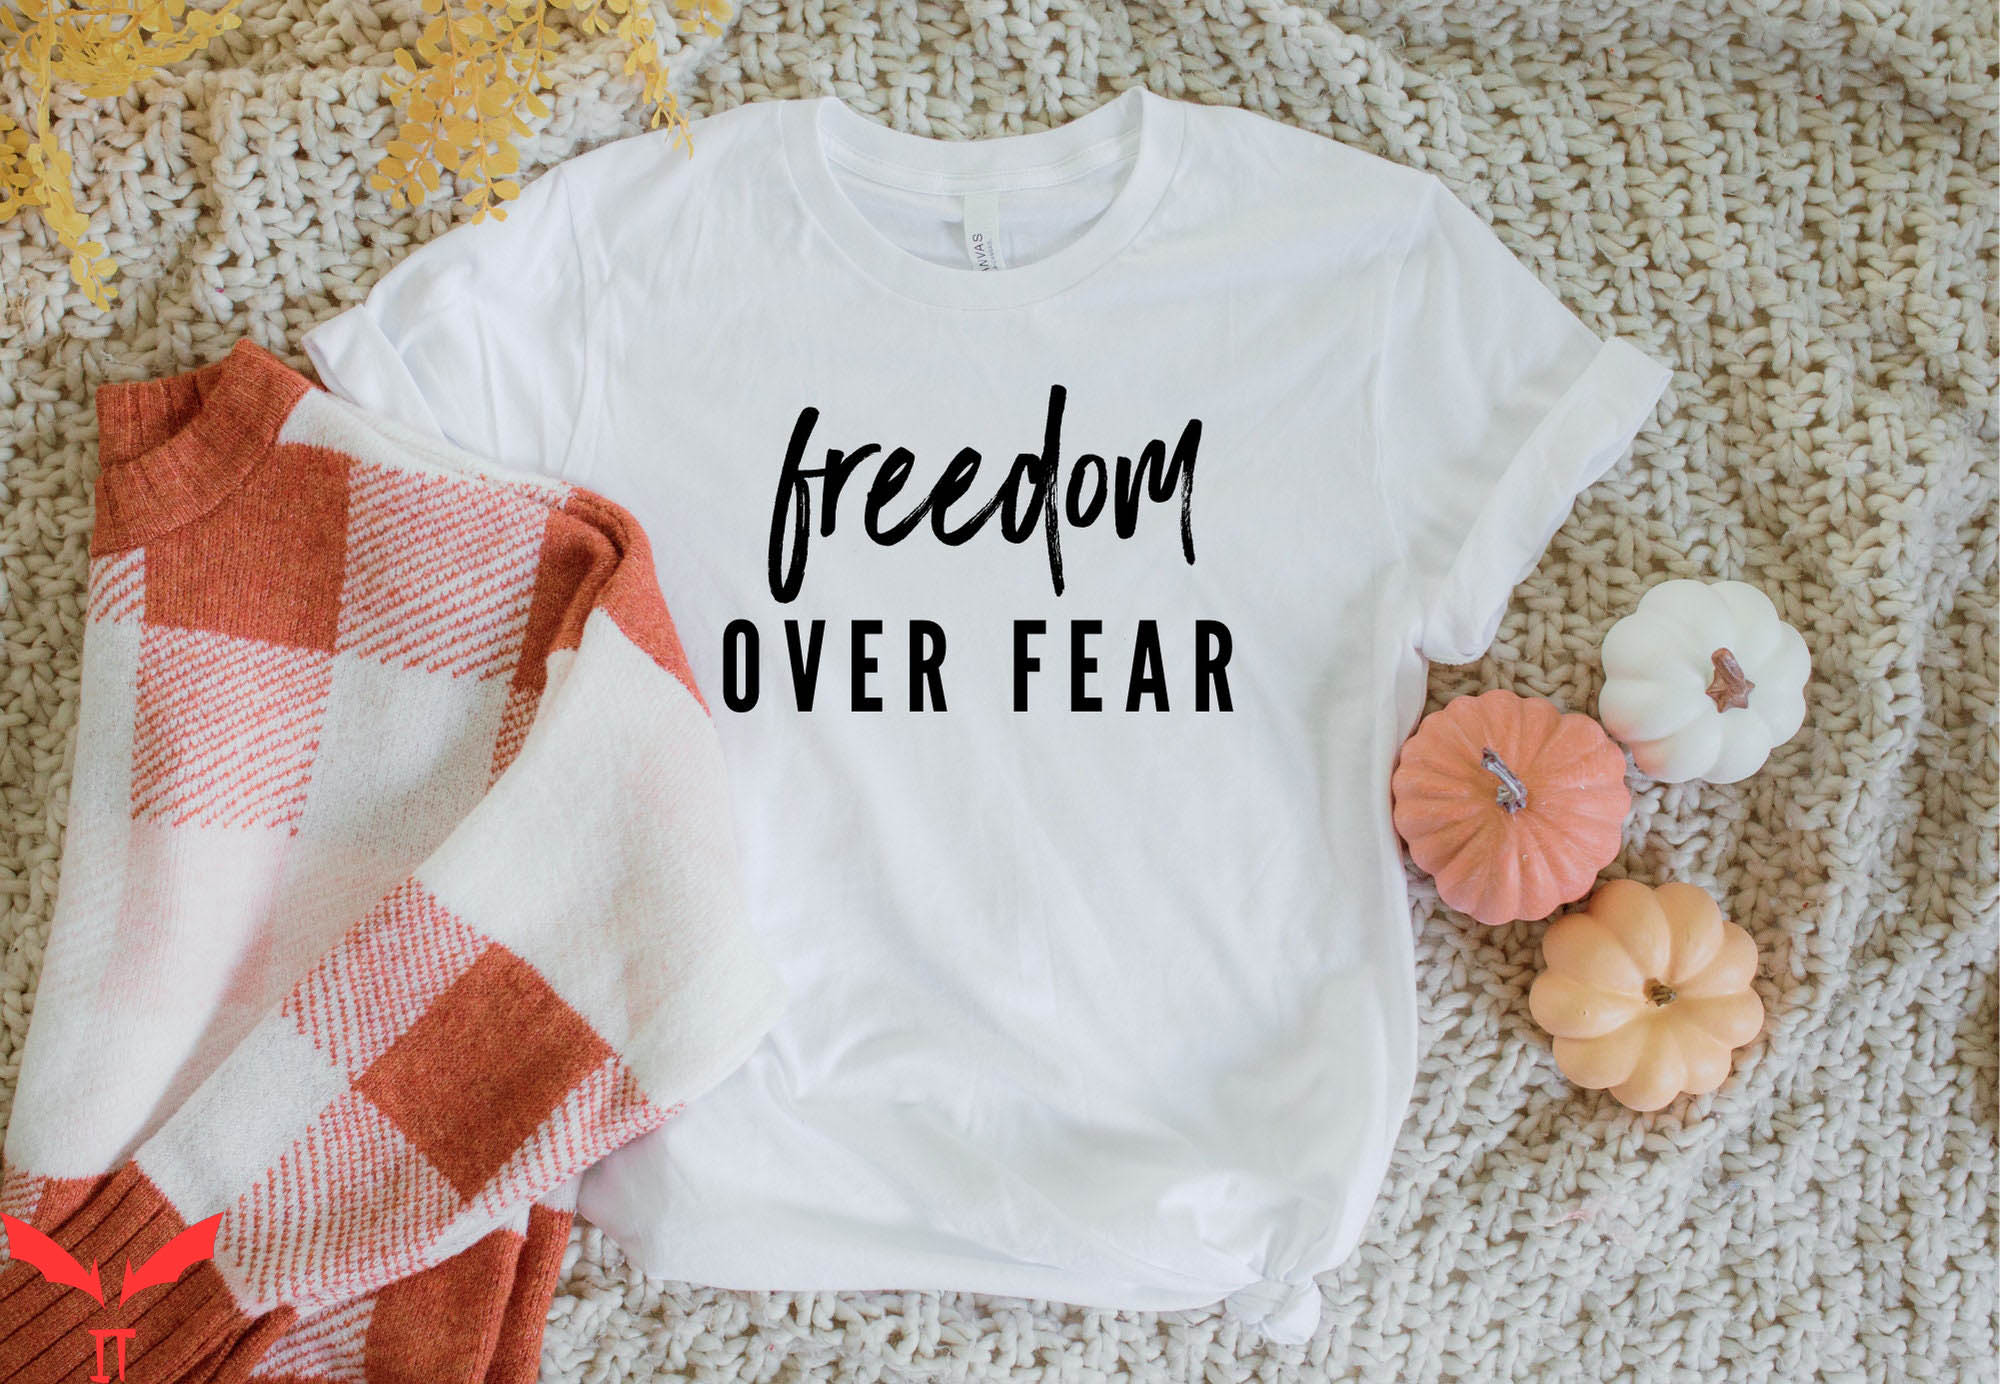 Freedom Over Fear T-Shirt Human Rights Patriotic Tee Shirt